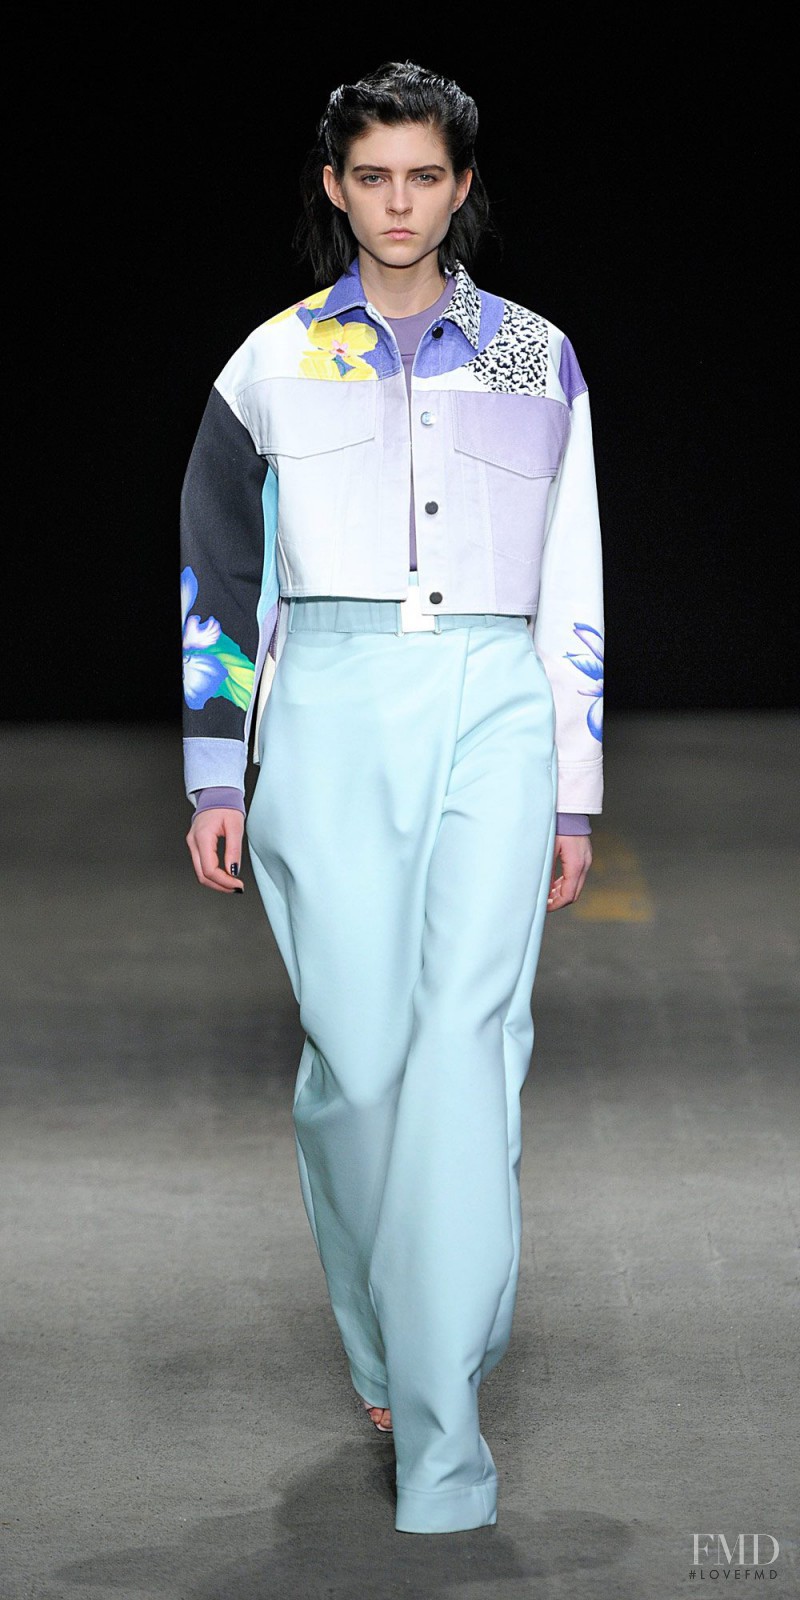 Kel Markey featured in  the 3.1 Phillip Lim fashion show for Autumn/Winter 2014